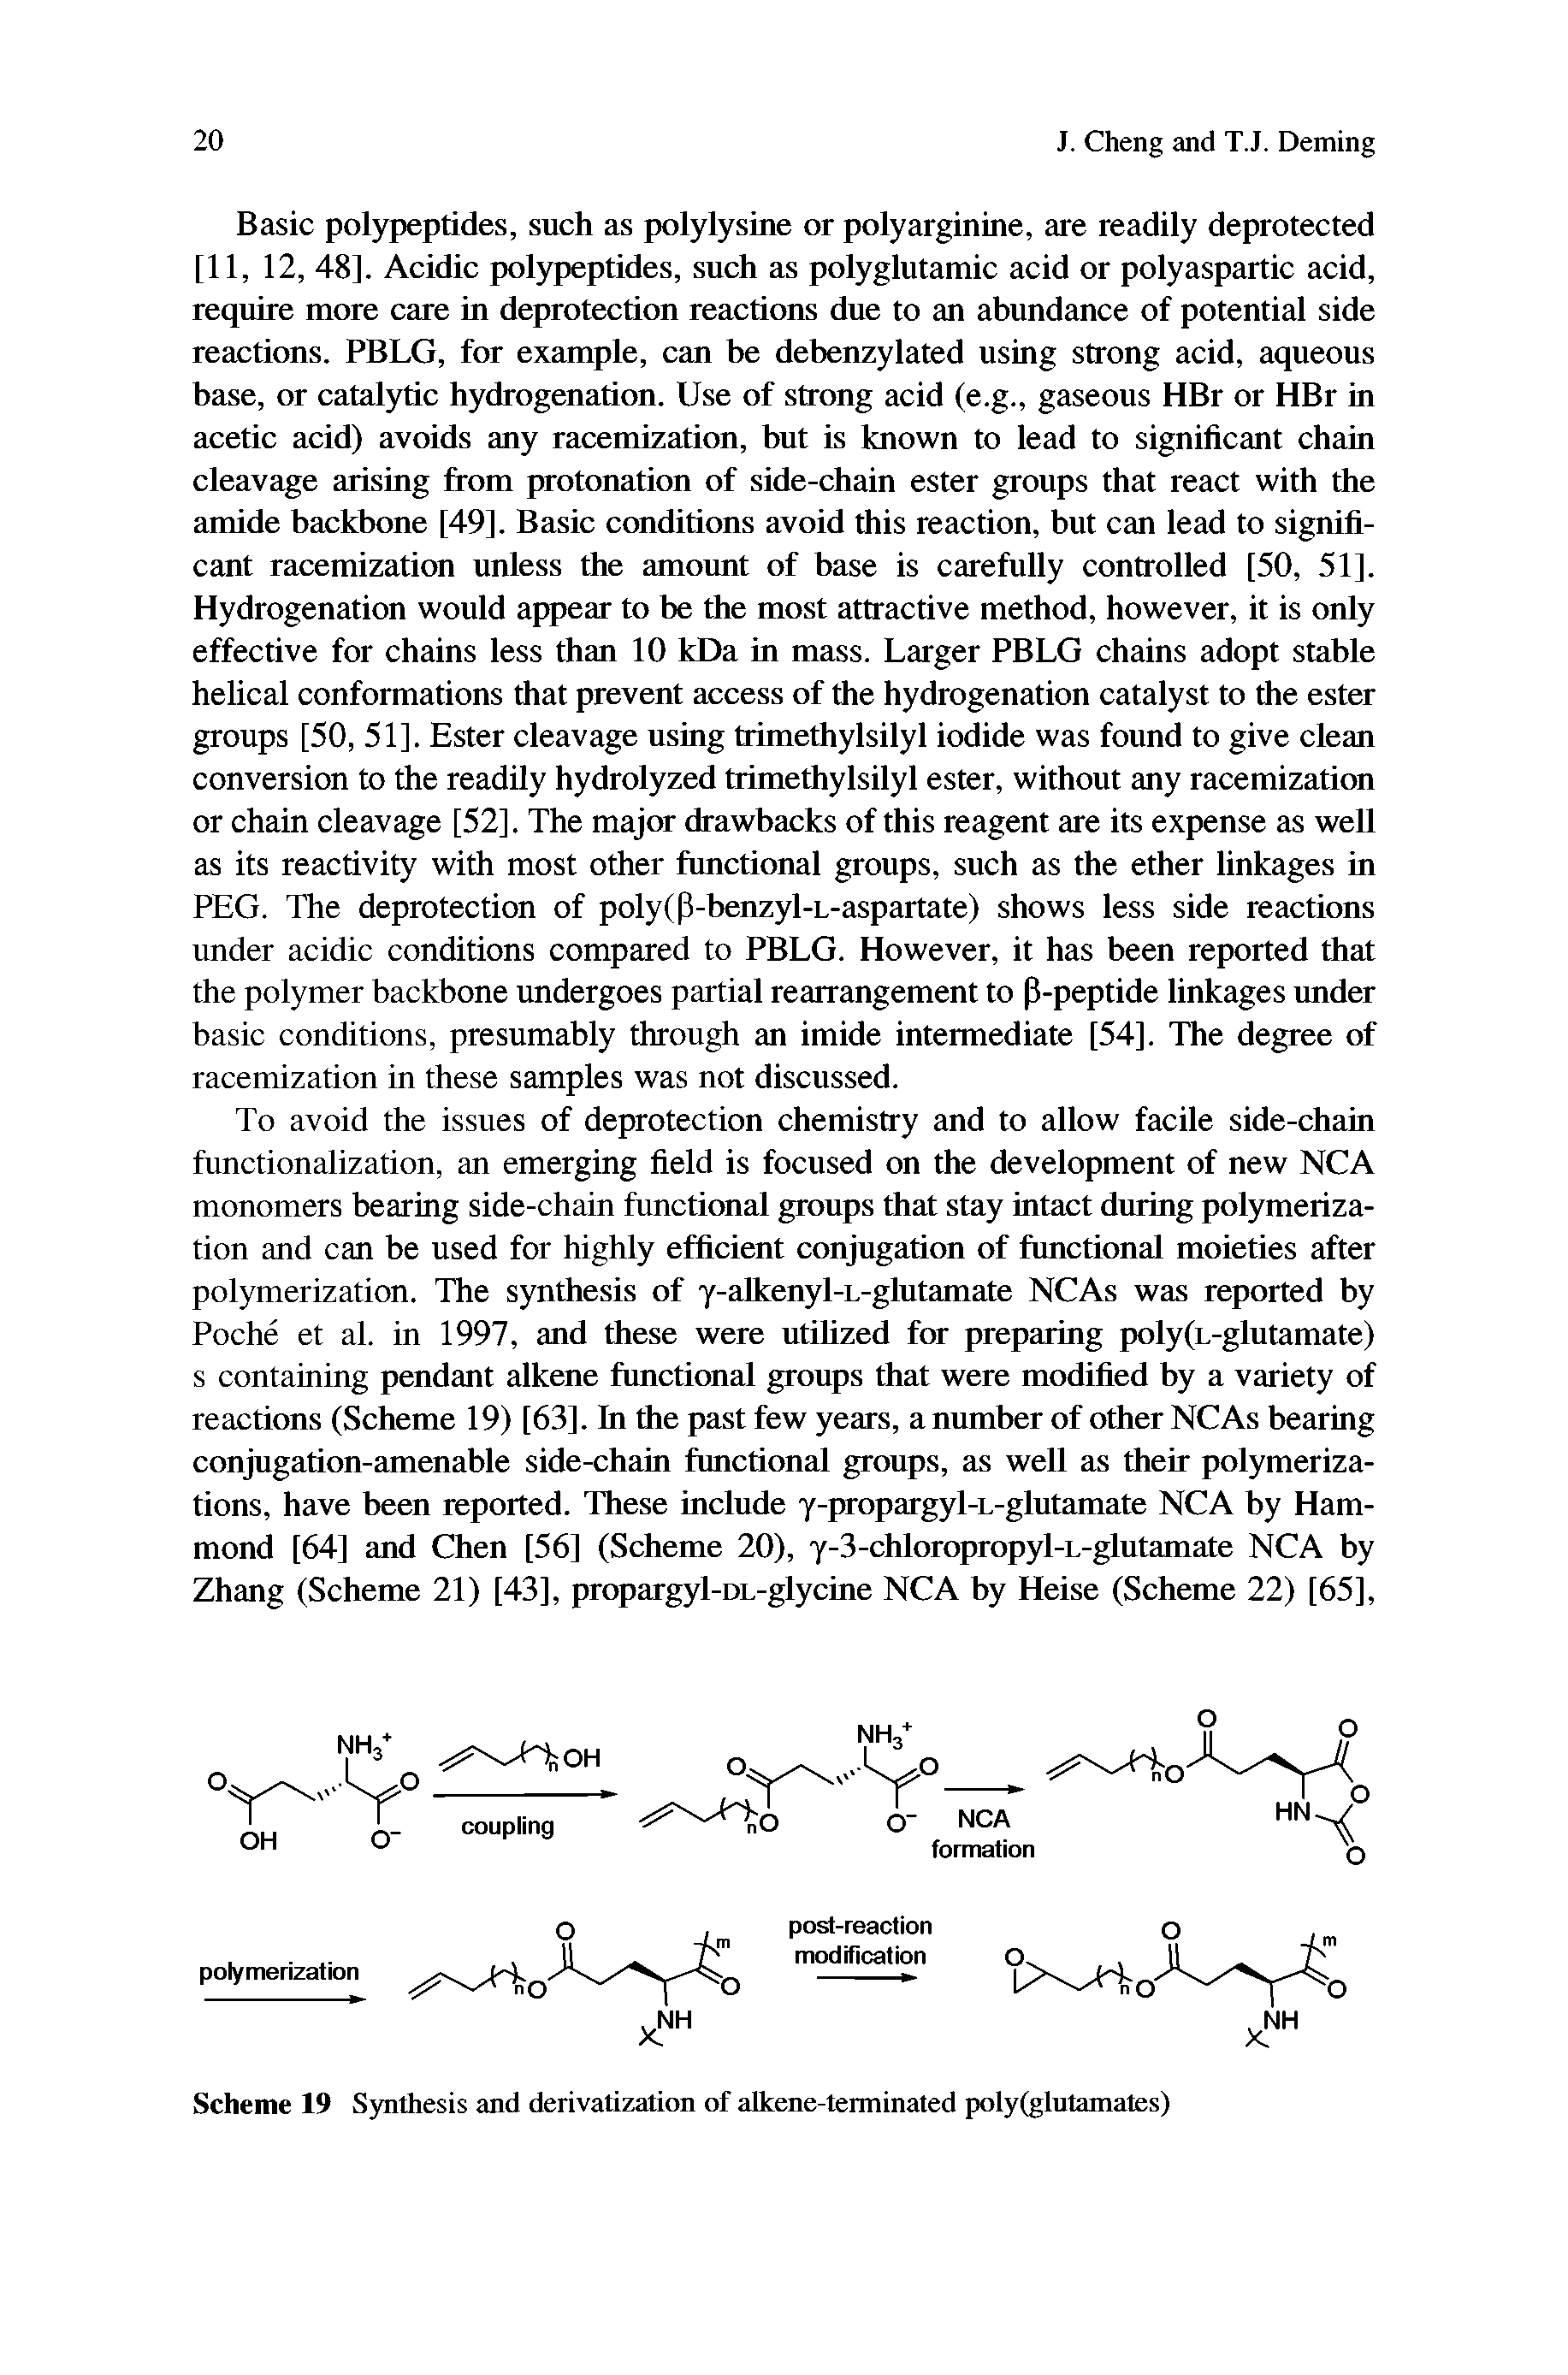 Scheme 19 Synthesis and derivatization of aUcene-terminated poly(glutamates)...